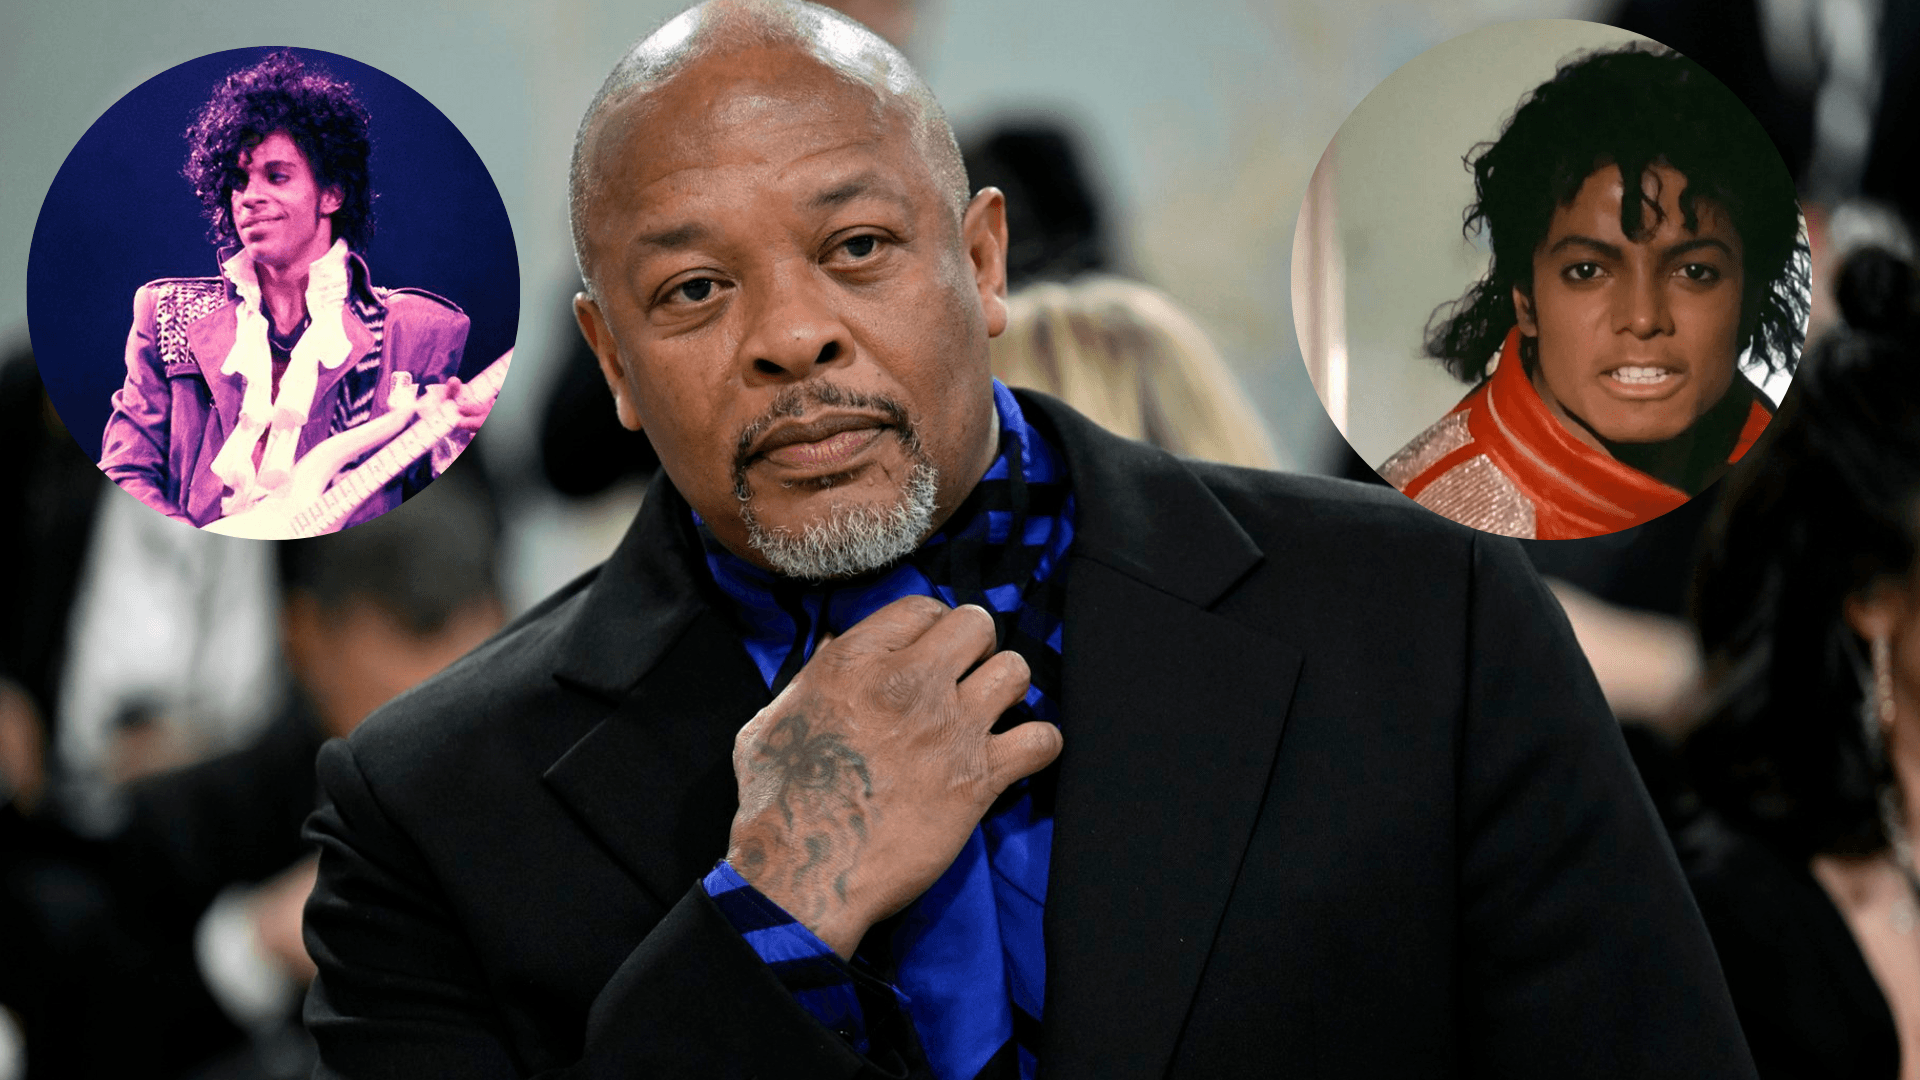 Dr. Dre reveals he refused to work with Michael Jackson and Prince